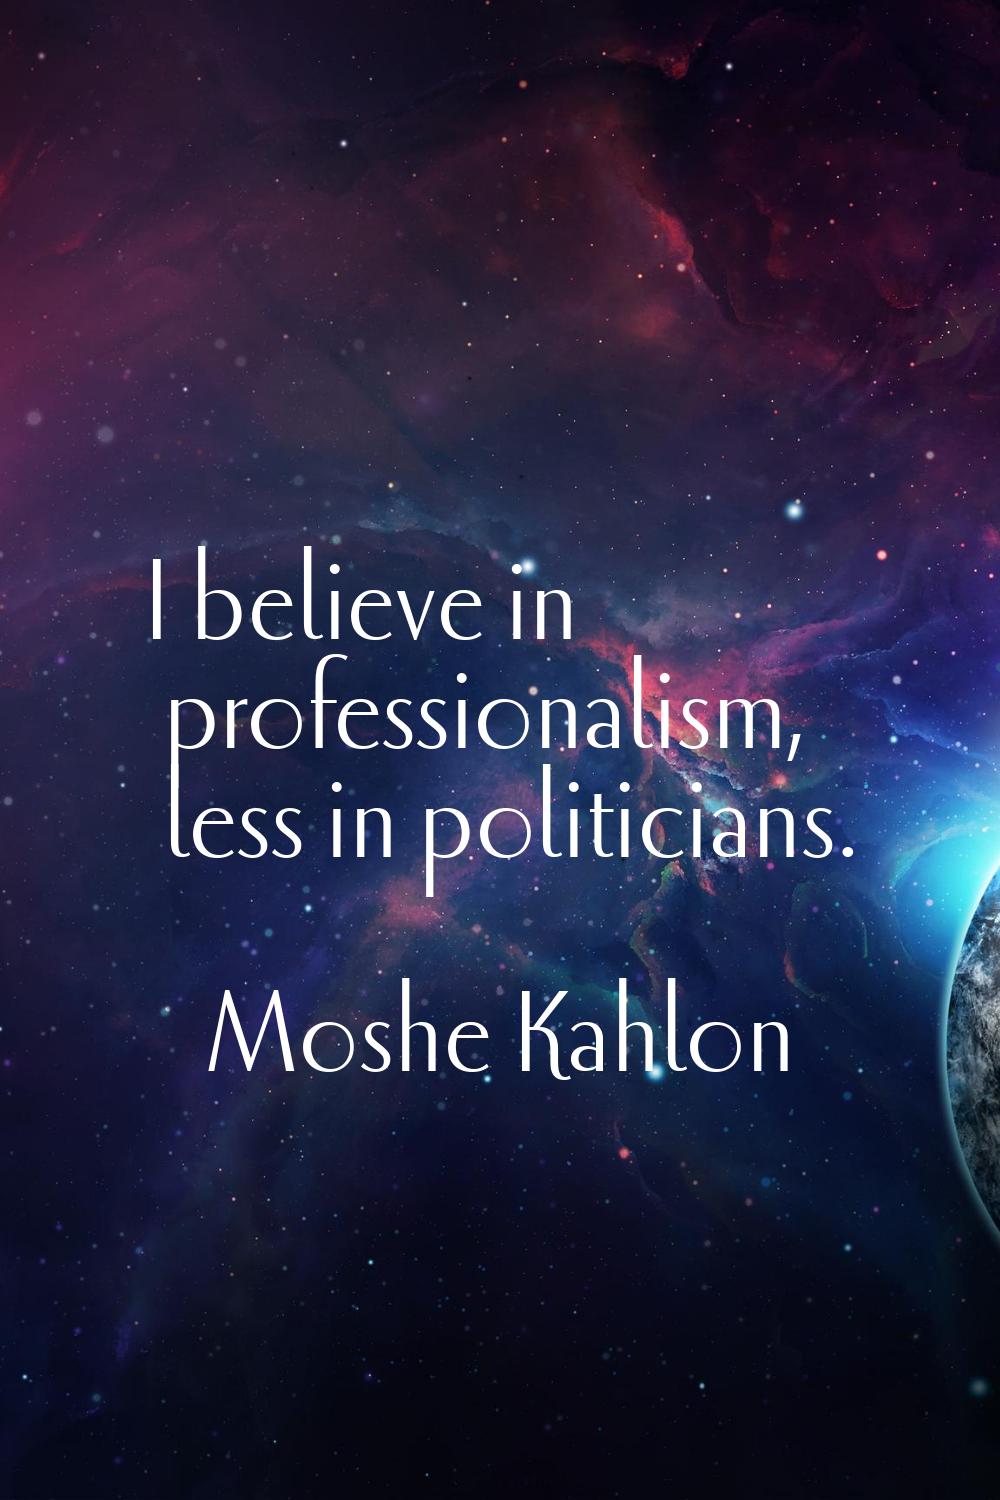 I believe in professionalism, less in politicians.